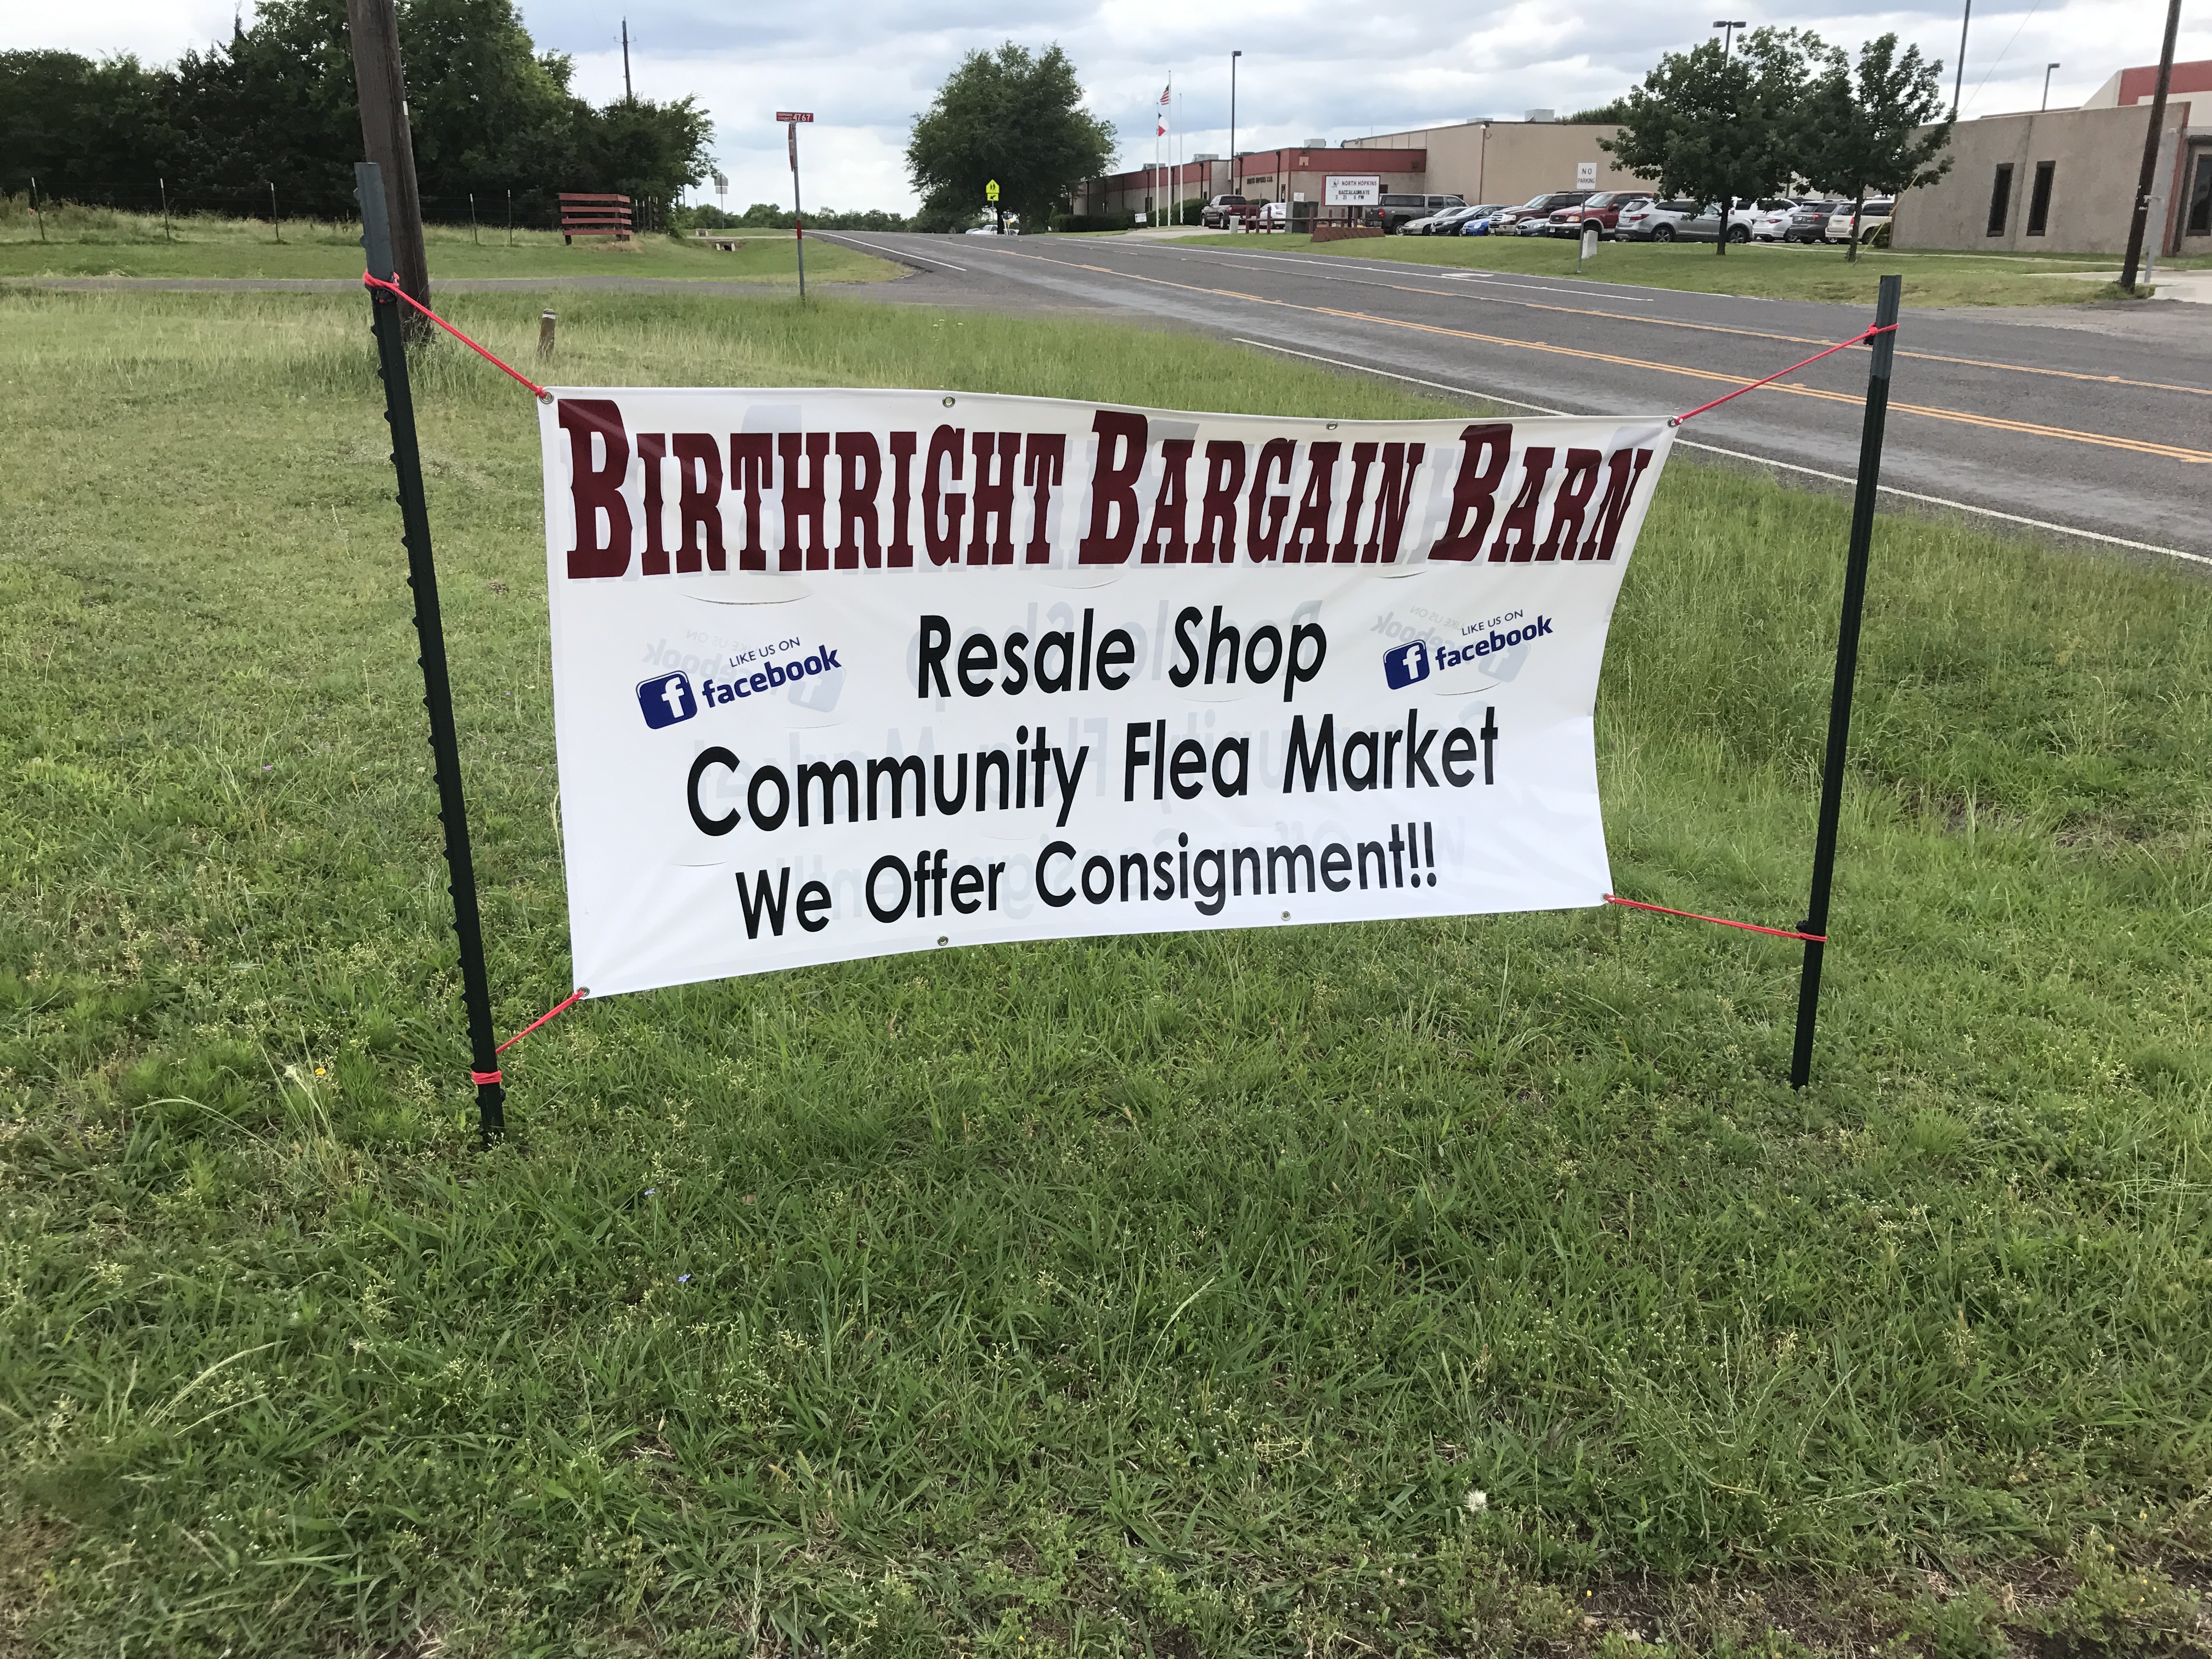 Birthright Bargain Barn Resale Shop Now Open in North Hopkins